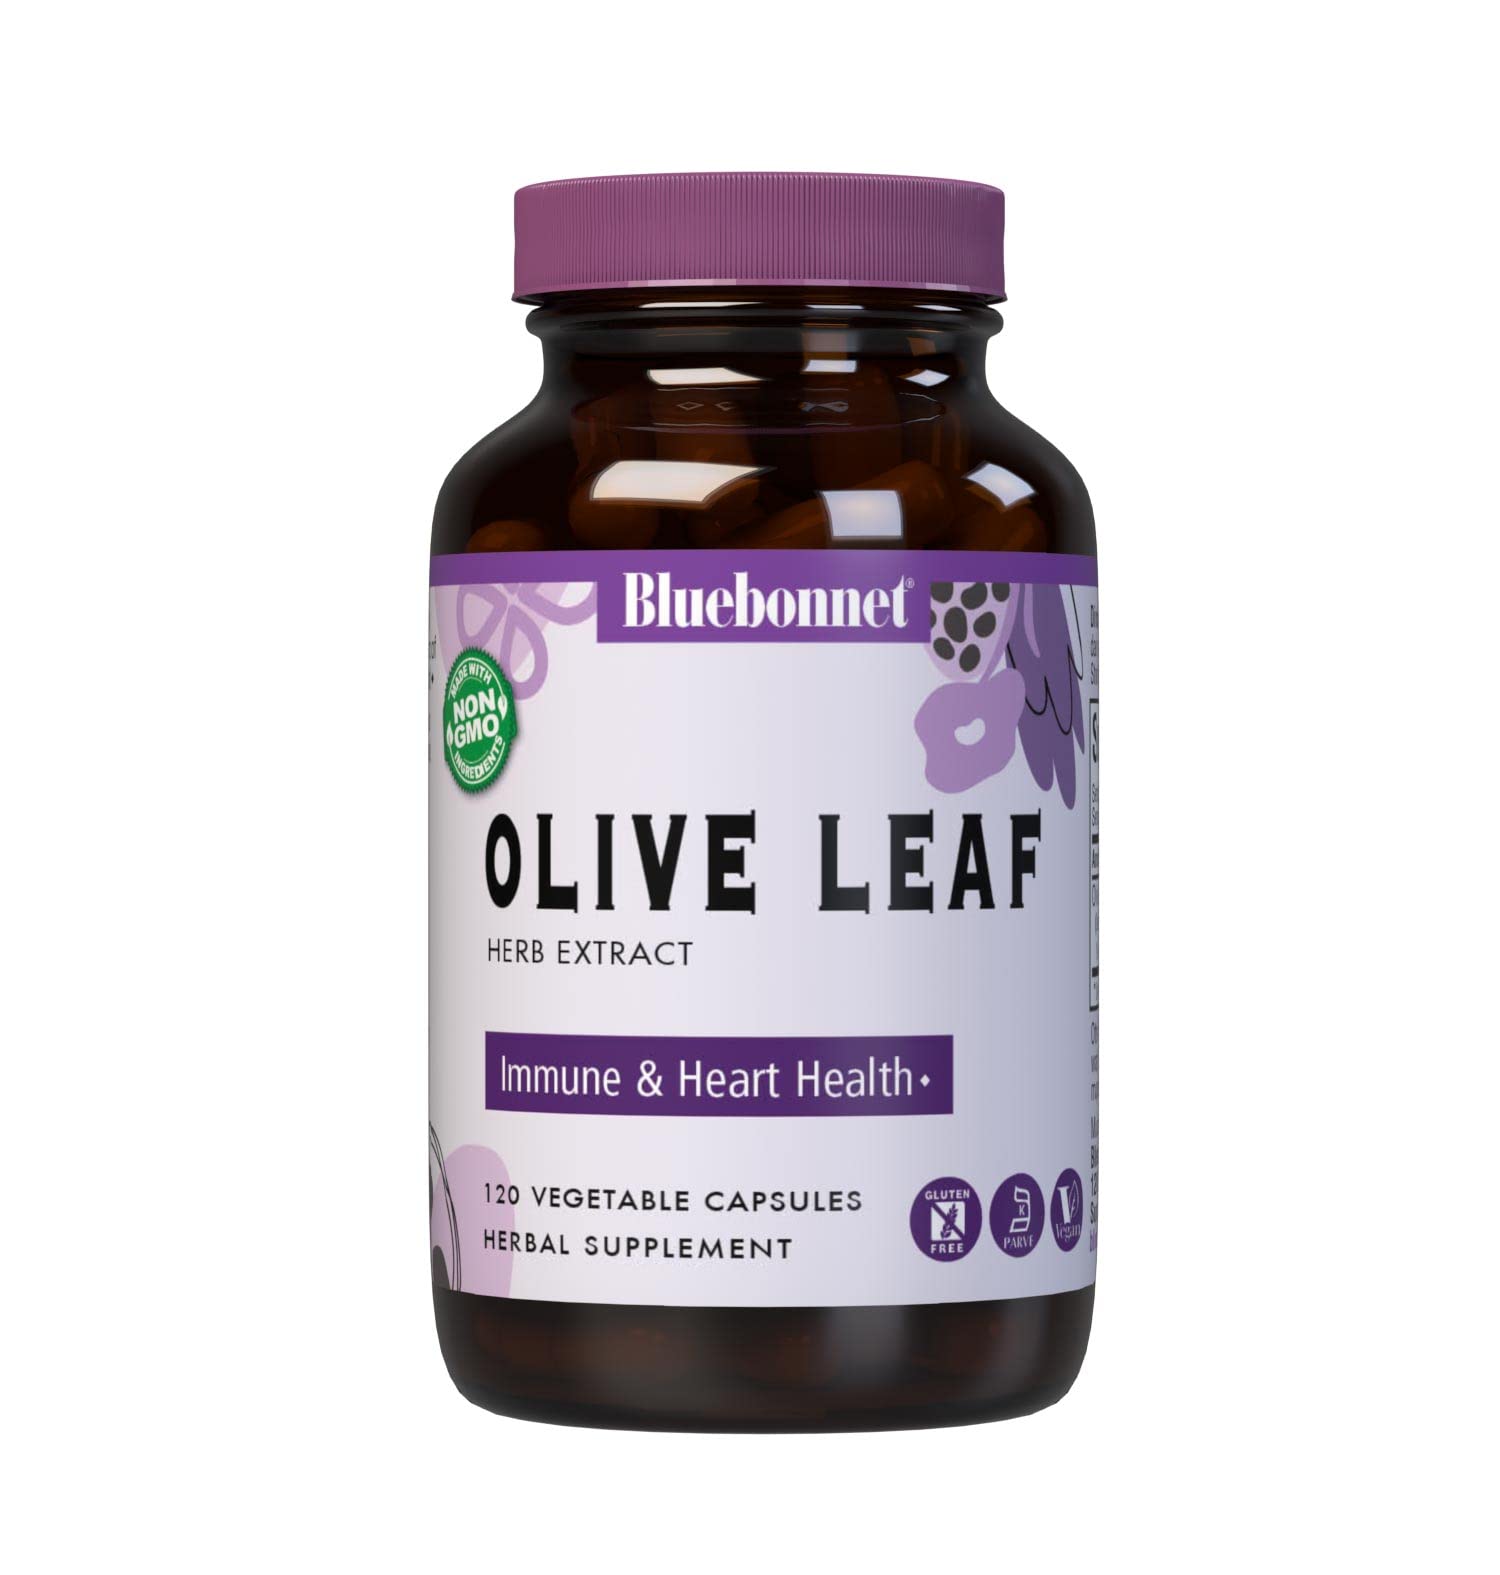 BlueBonnet Nutrition Olive Leaf Herb Extract, Supports Immune Health*, Heart Health*, Gluten-Free, Soy-Free, Kosher Certified, Non-GMO, Vegan, 120 Vegetable Capsules, 120 Servings